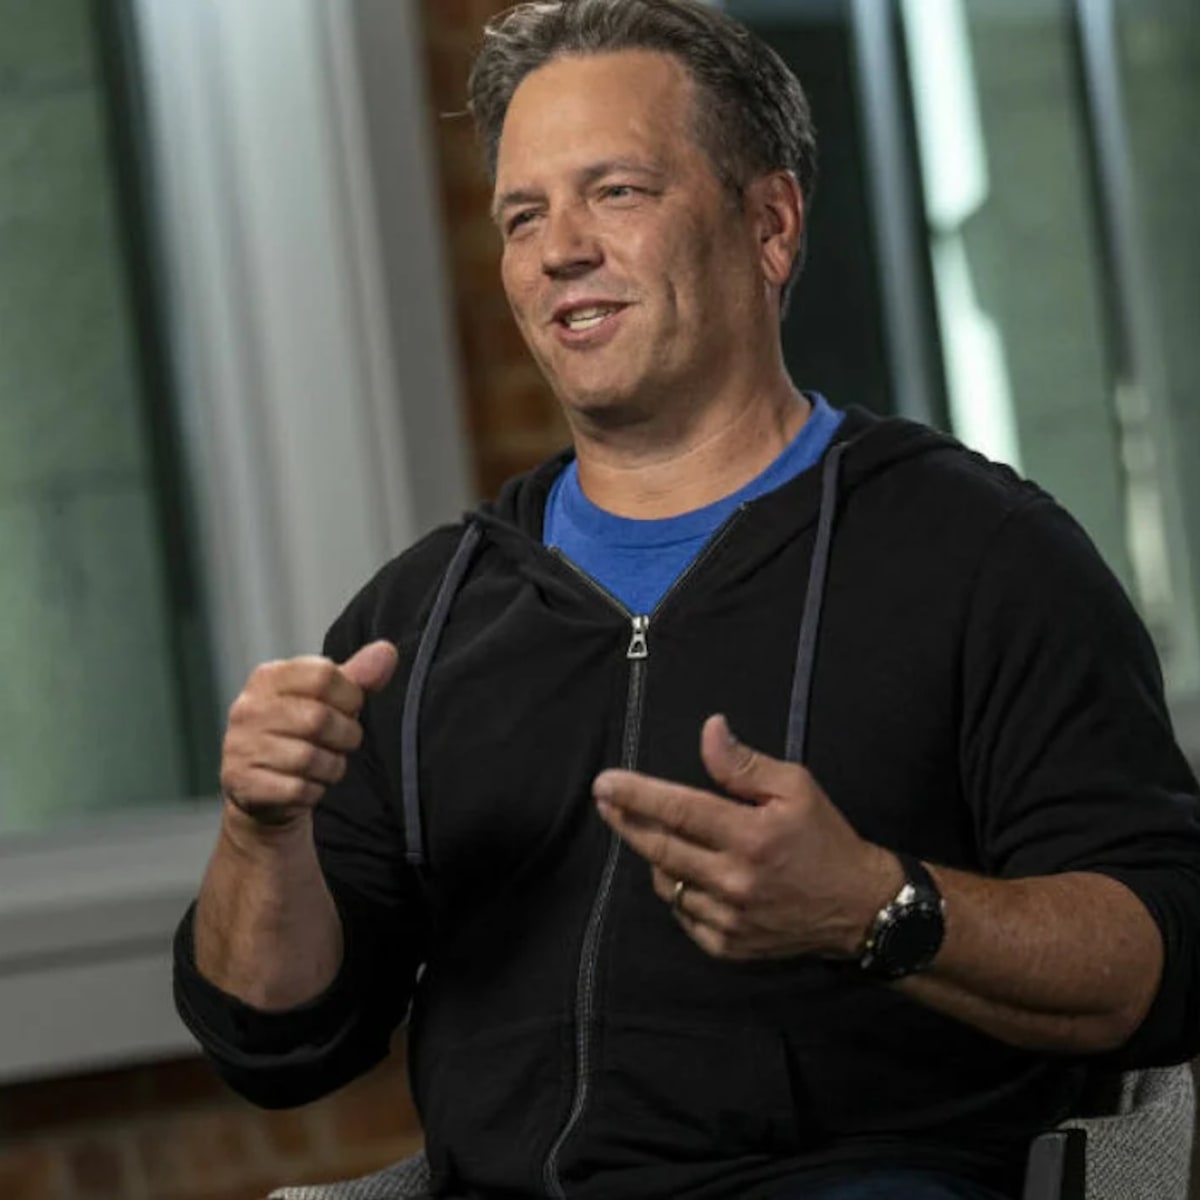 Xbox chief Phil Spencer talks about his love of Nintendo - My Nintendo News